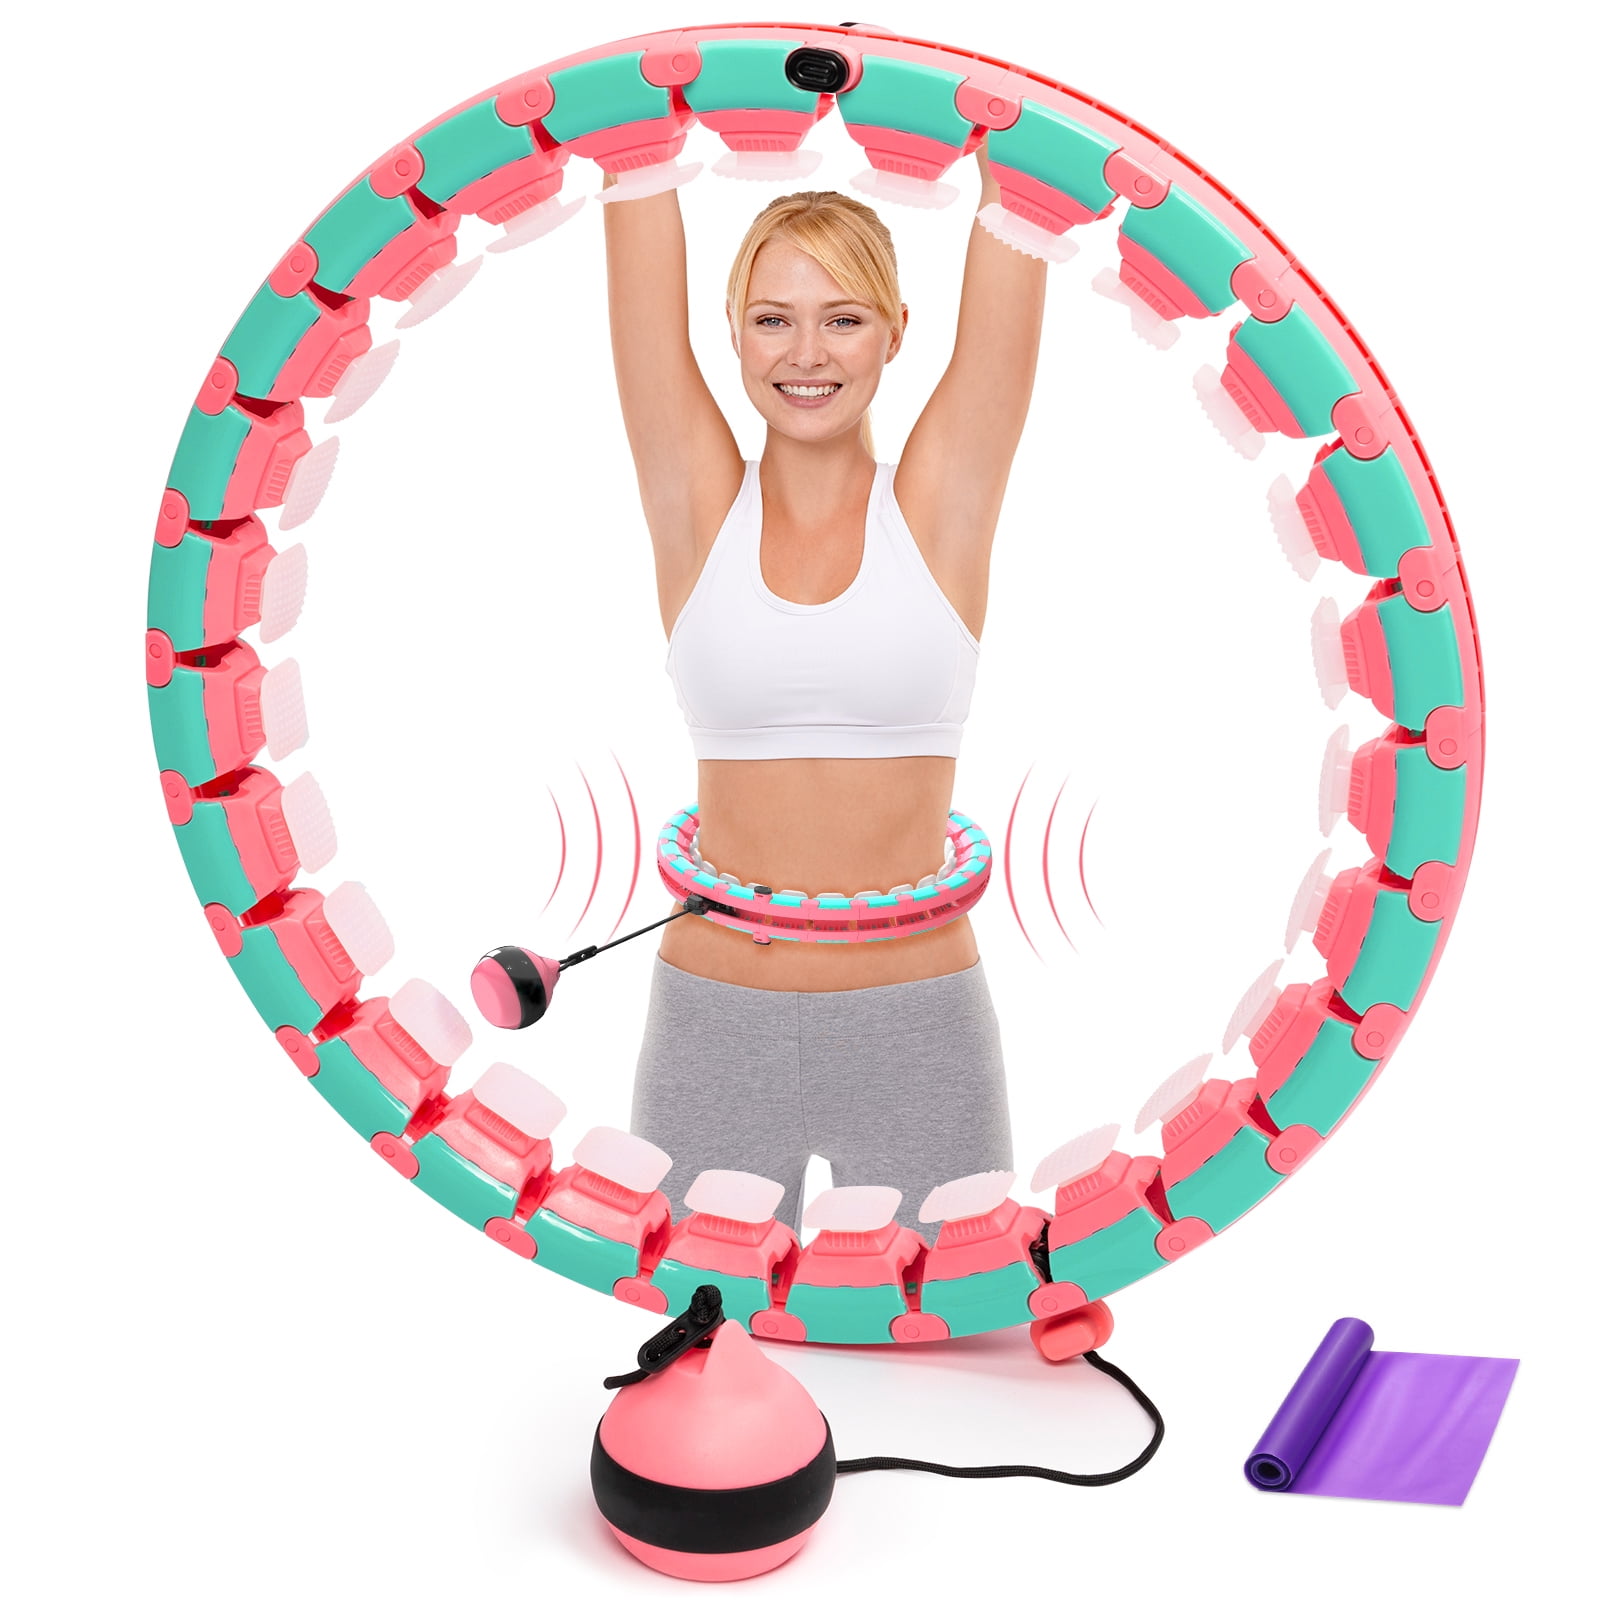 Comes with 5 Resistance Band Smart Hoola Hoops Adjustable and Detachable Fitness Hoop Perfect for Plus size Infinity Hoops for Weight Loss Weighted Smart Hula Hoop Workout Equipment at Home 